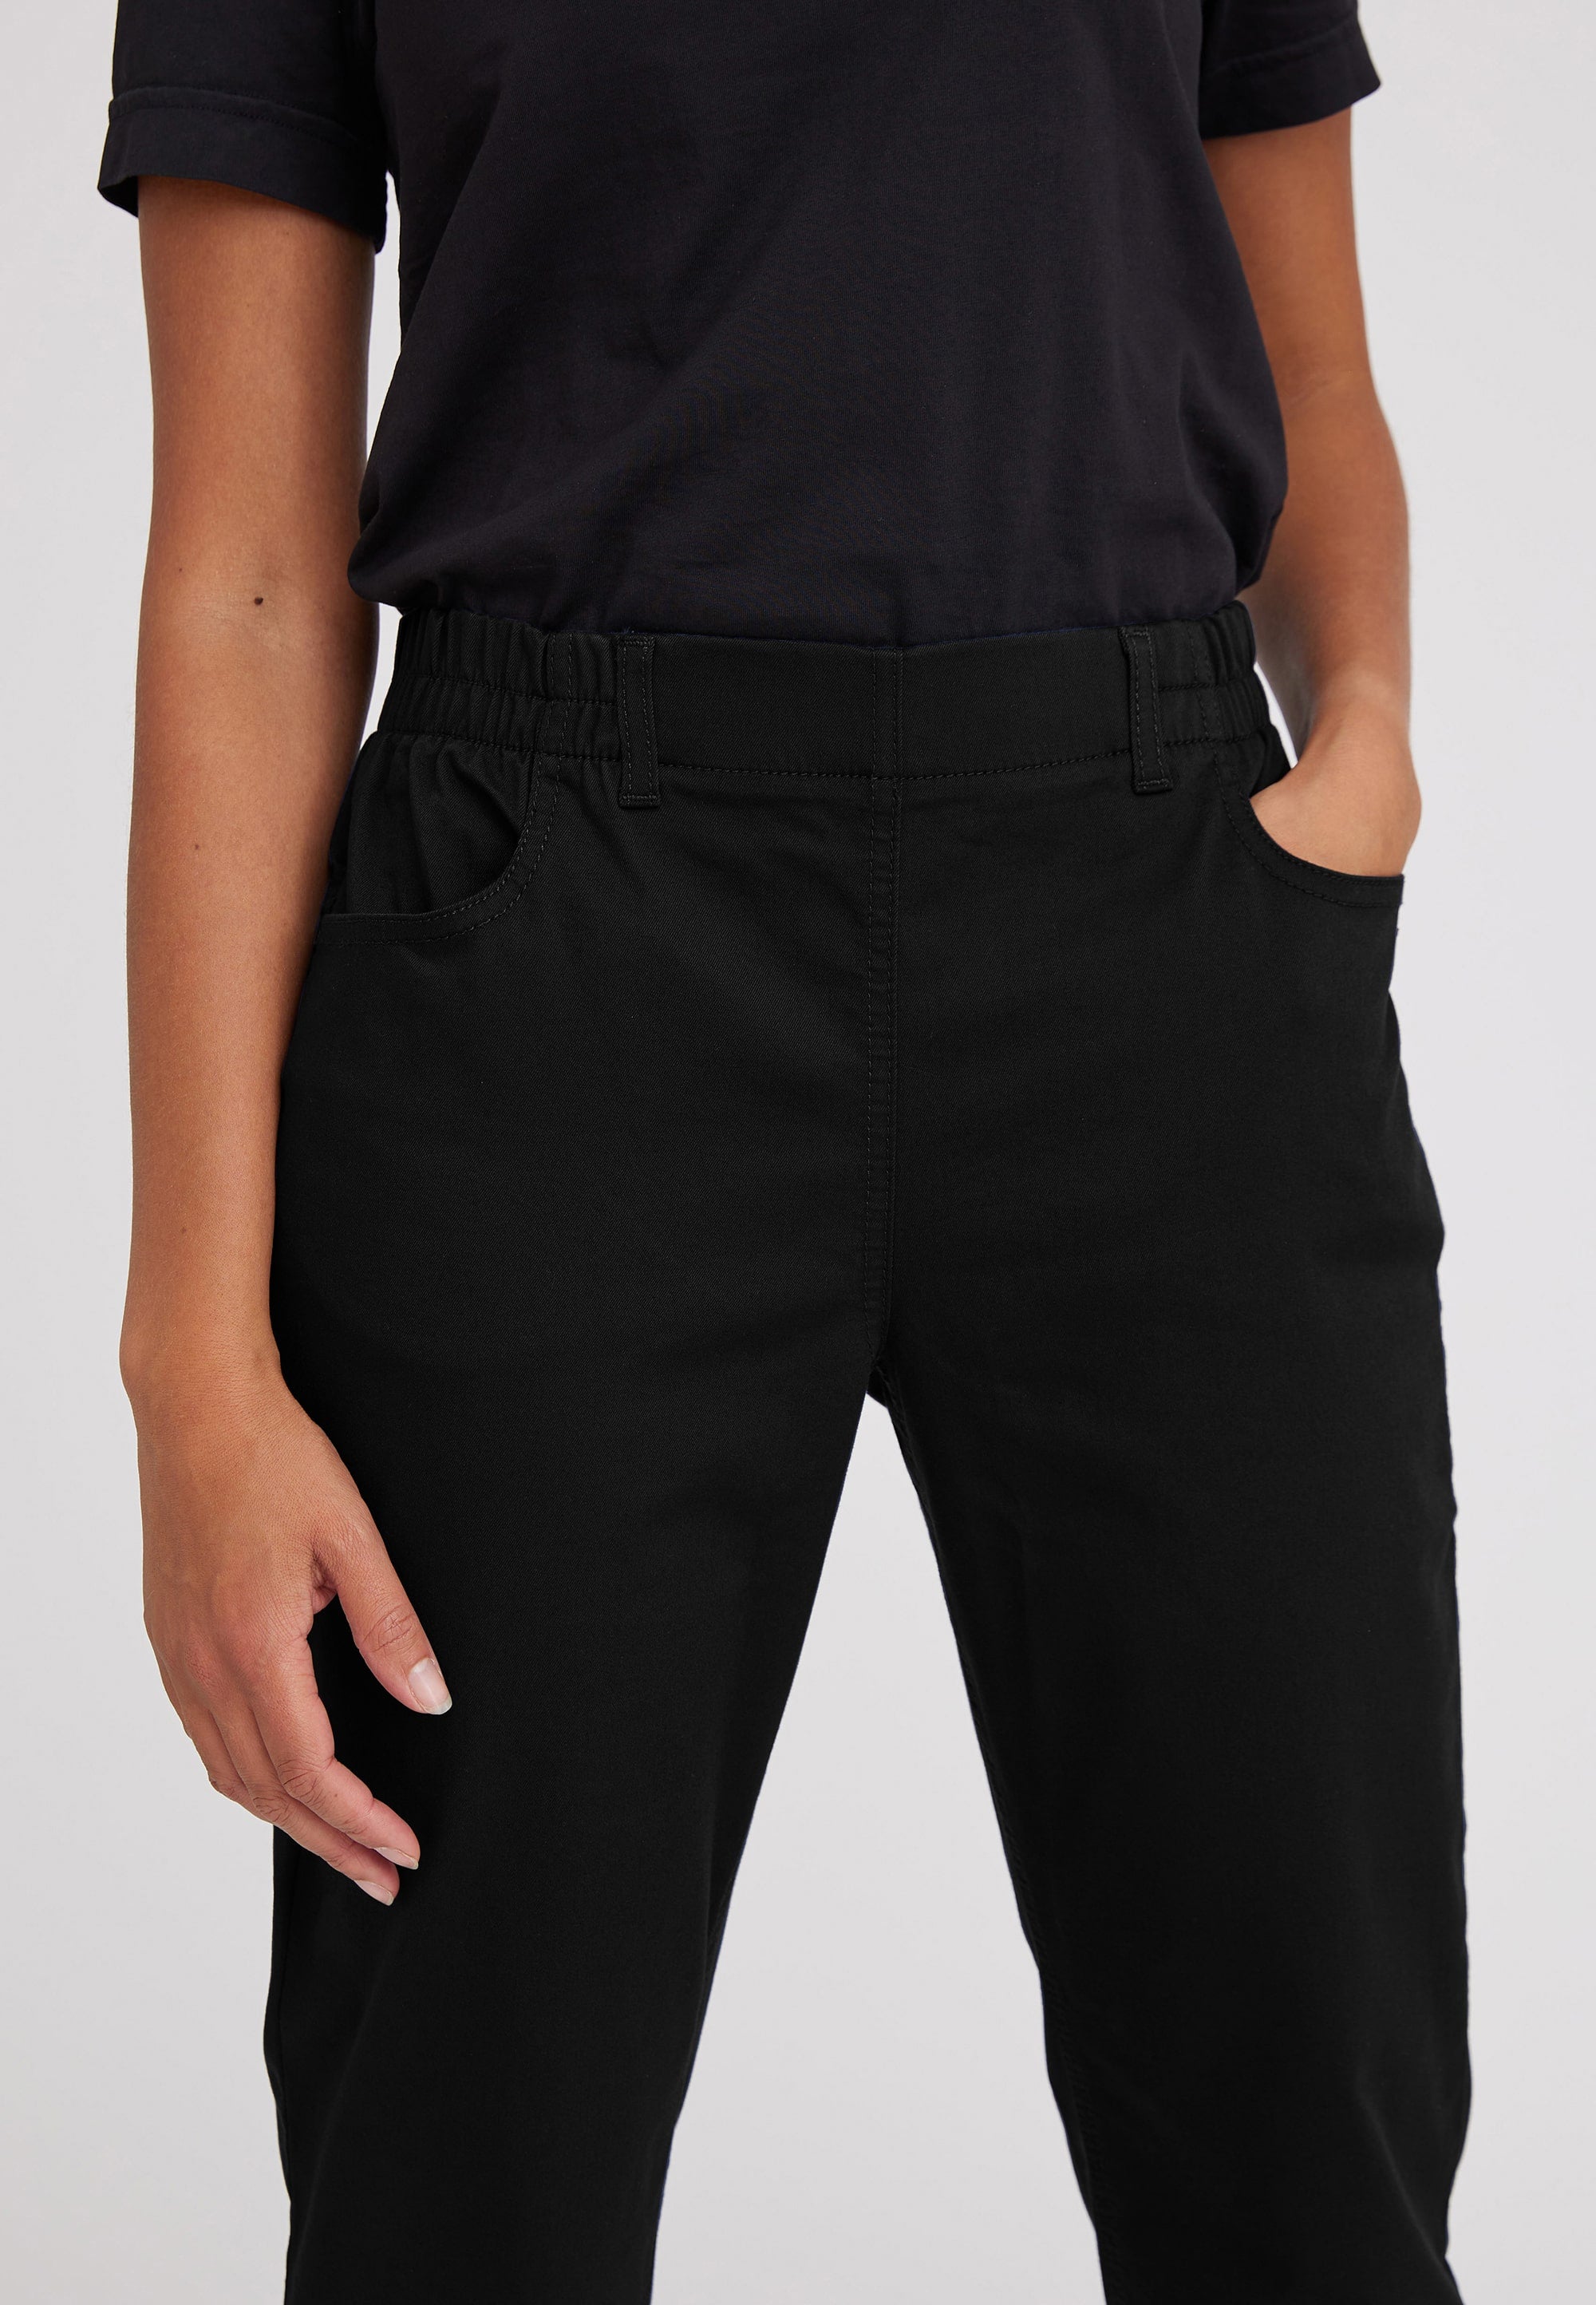 LAURIE  Violet Relaxed - Medium Length Trousers RELAXED 99000 Black